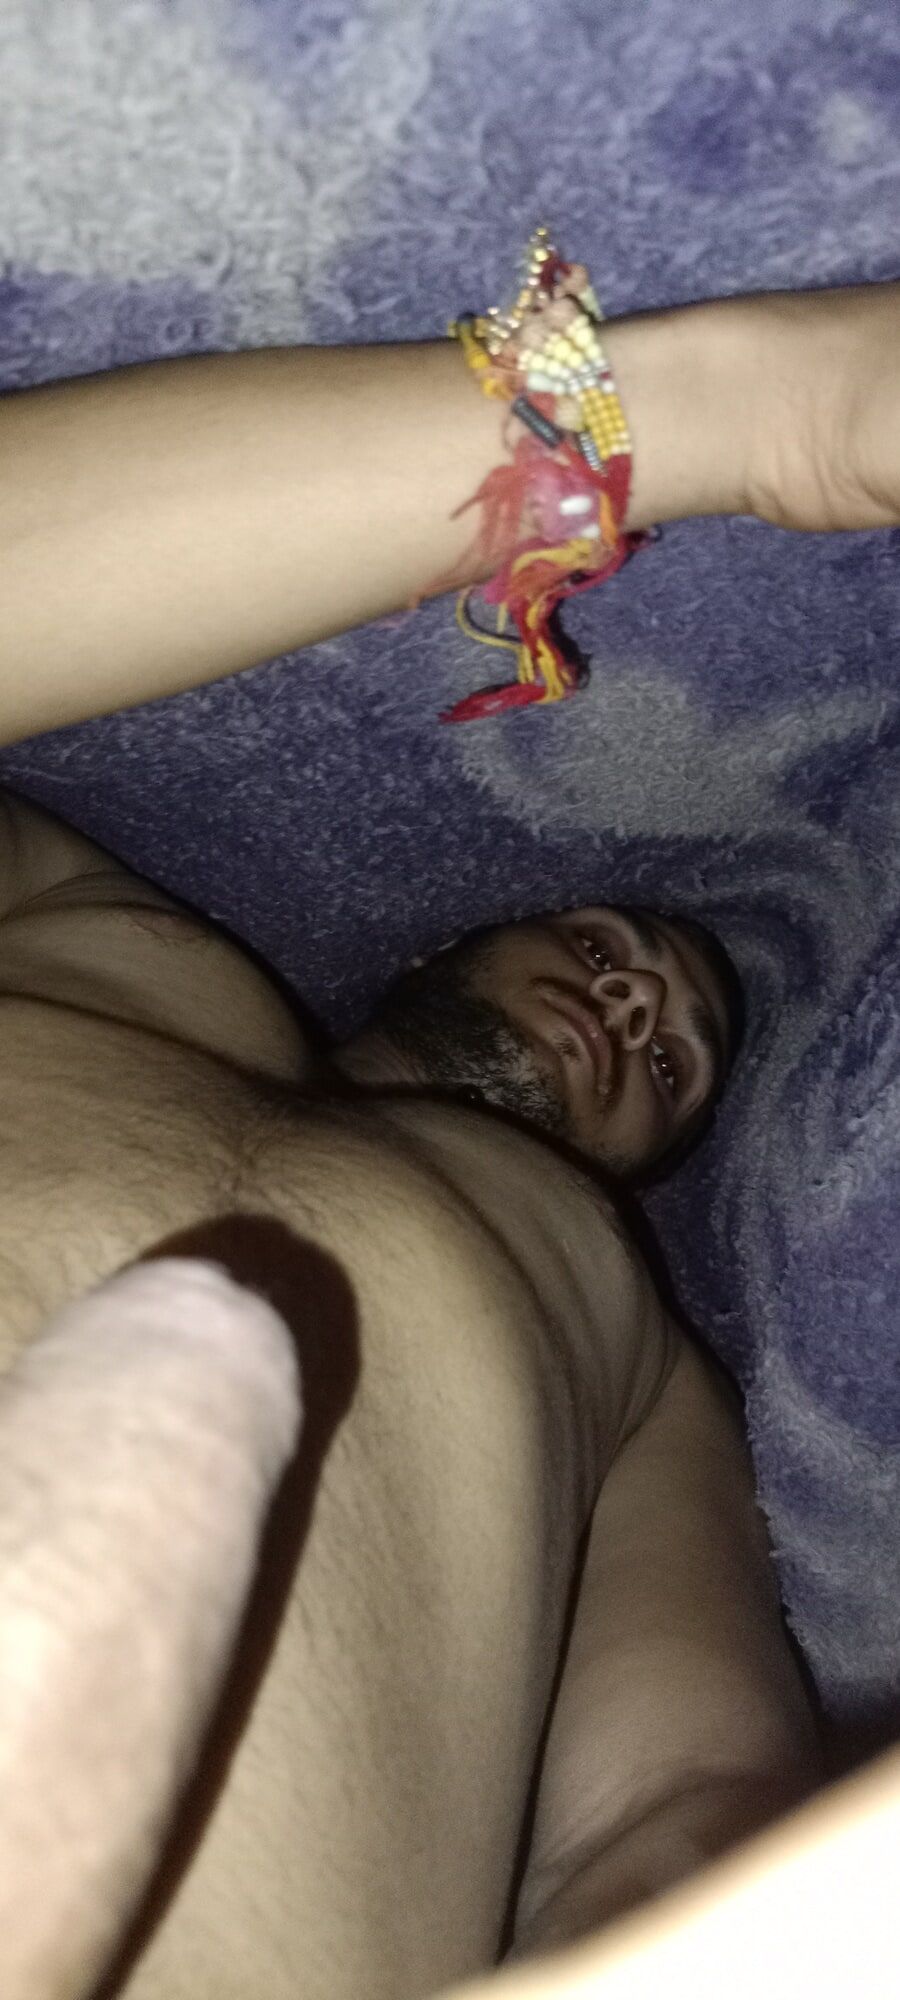 This is my big cocks 